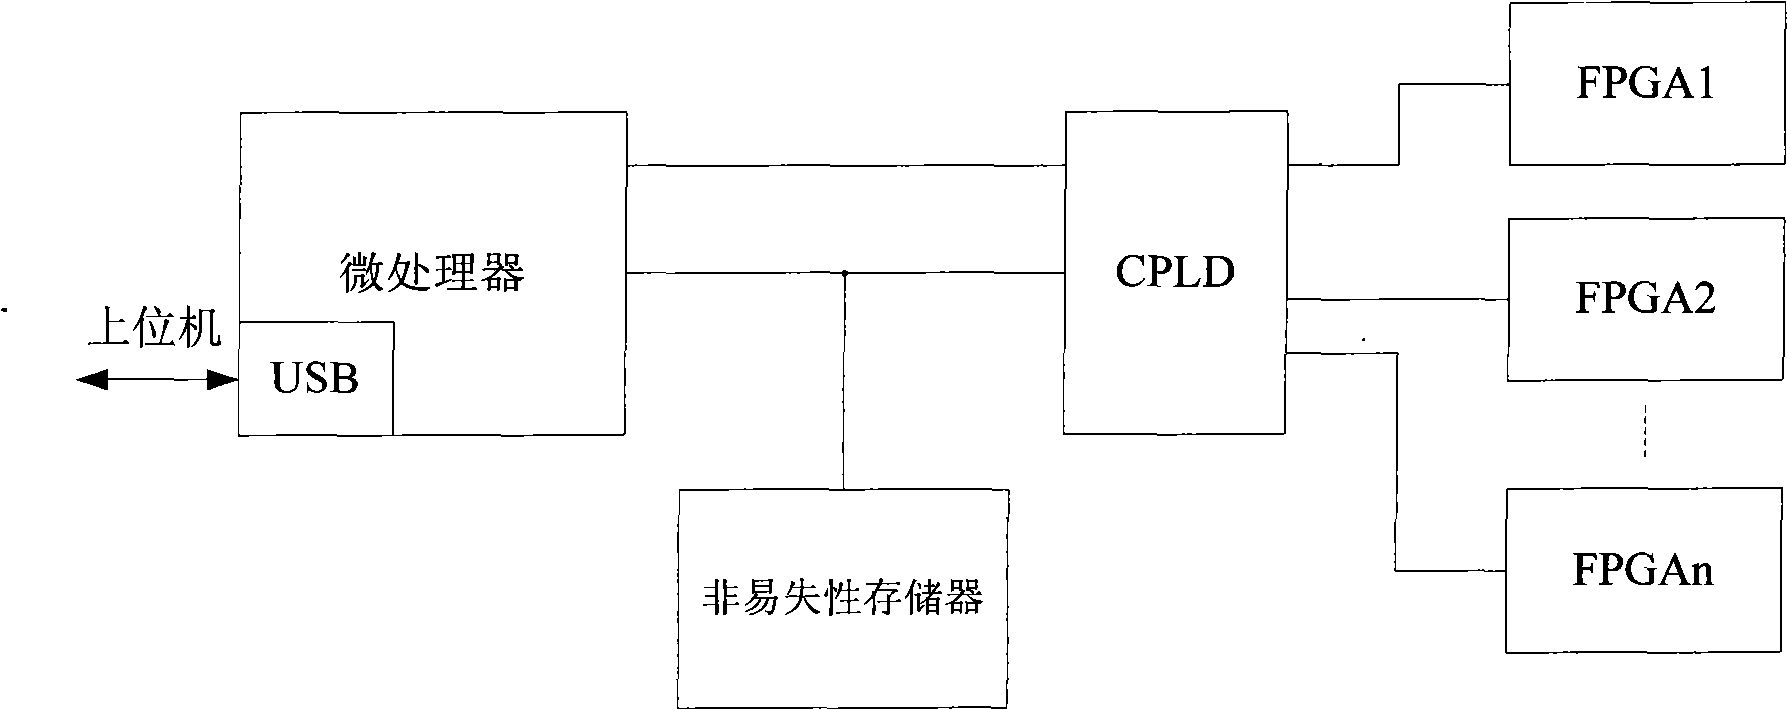 System for unified configuration and management of FPGA chip in equipment